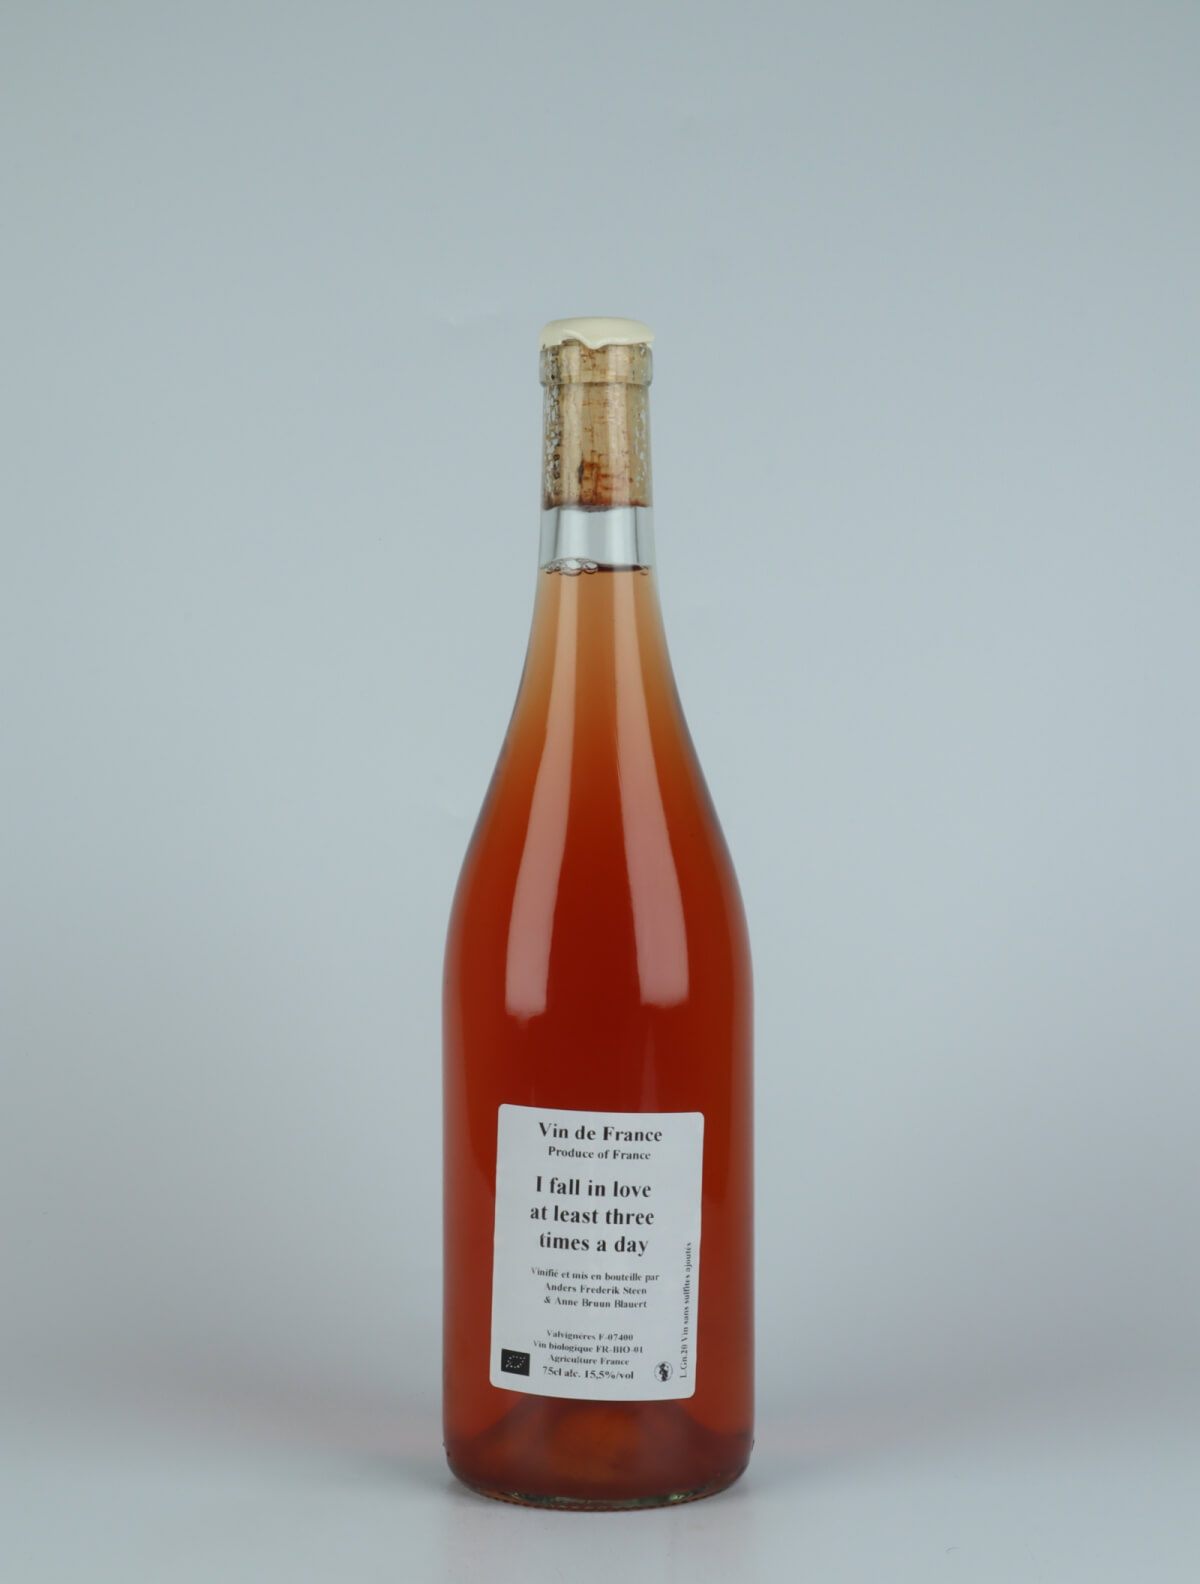 A bottle 2020 I fall in love at least three times a day Rosé from Anders Frederik Steen & Anne Bruun Blauert, Ardèche in France